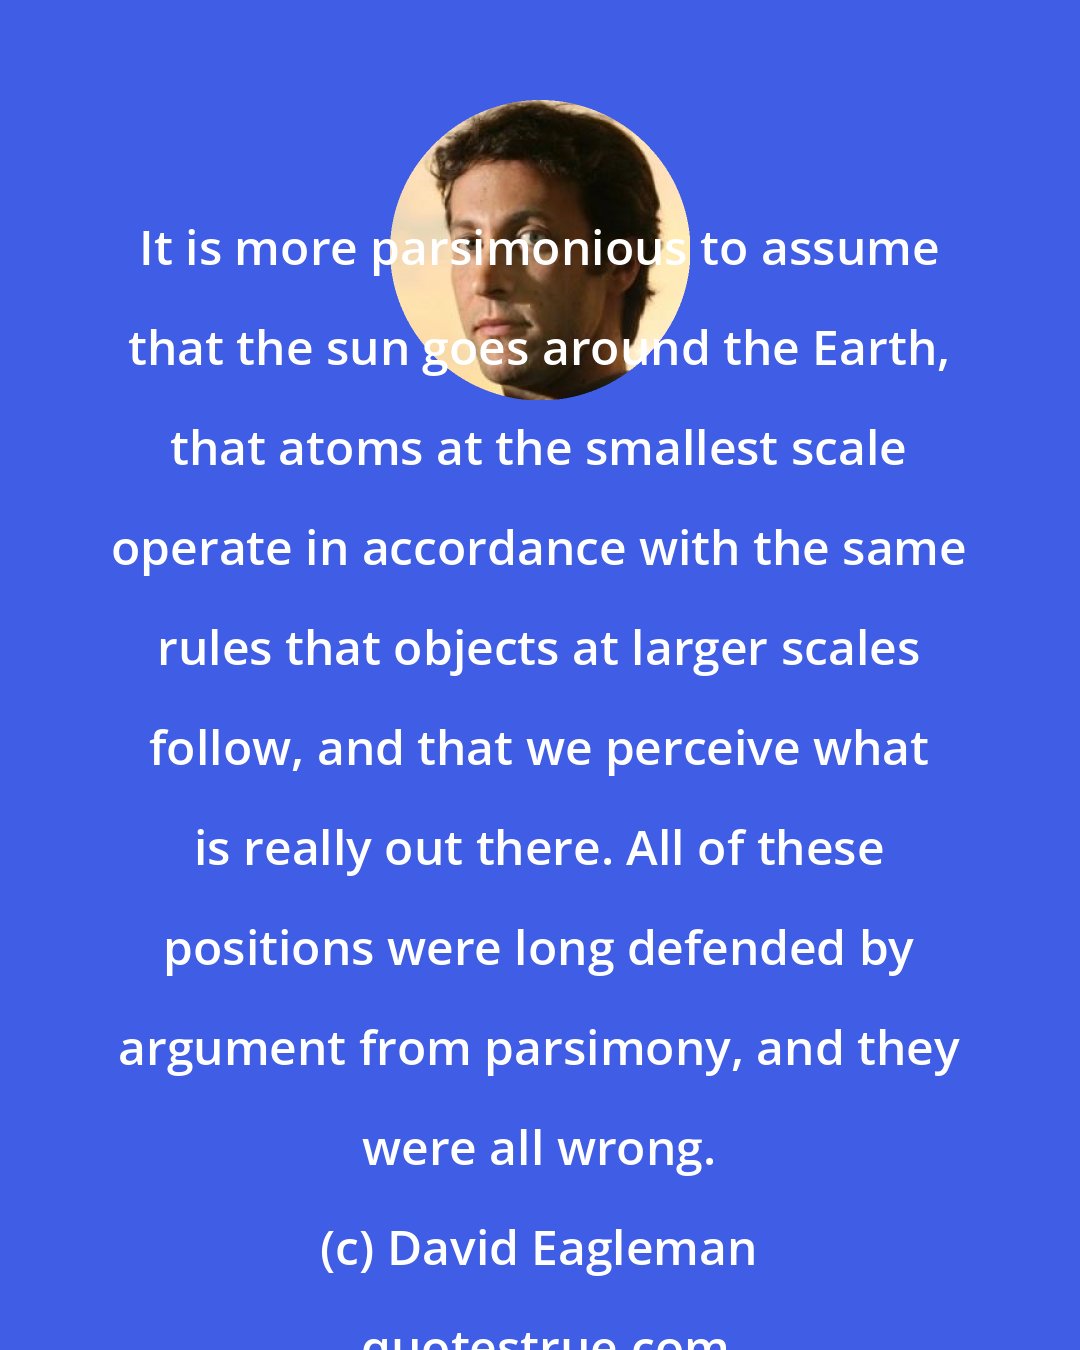 David Eagleman: It is more parsimonious to assume that the sun goes around the Earth, that atoms at the smallest scale operate in accordance with the same rules that objects at larger scales follow, and that we perceive what is really out there. All of these positions were long defended by argument from parsimony, and they were all wrong.